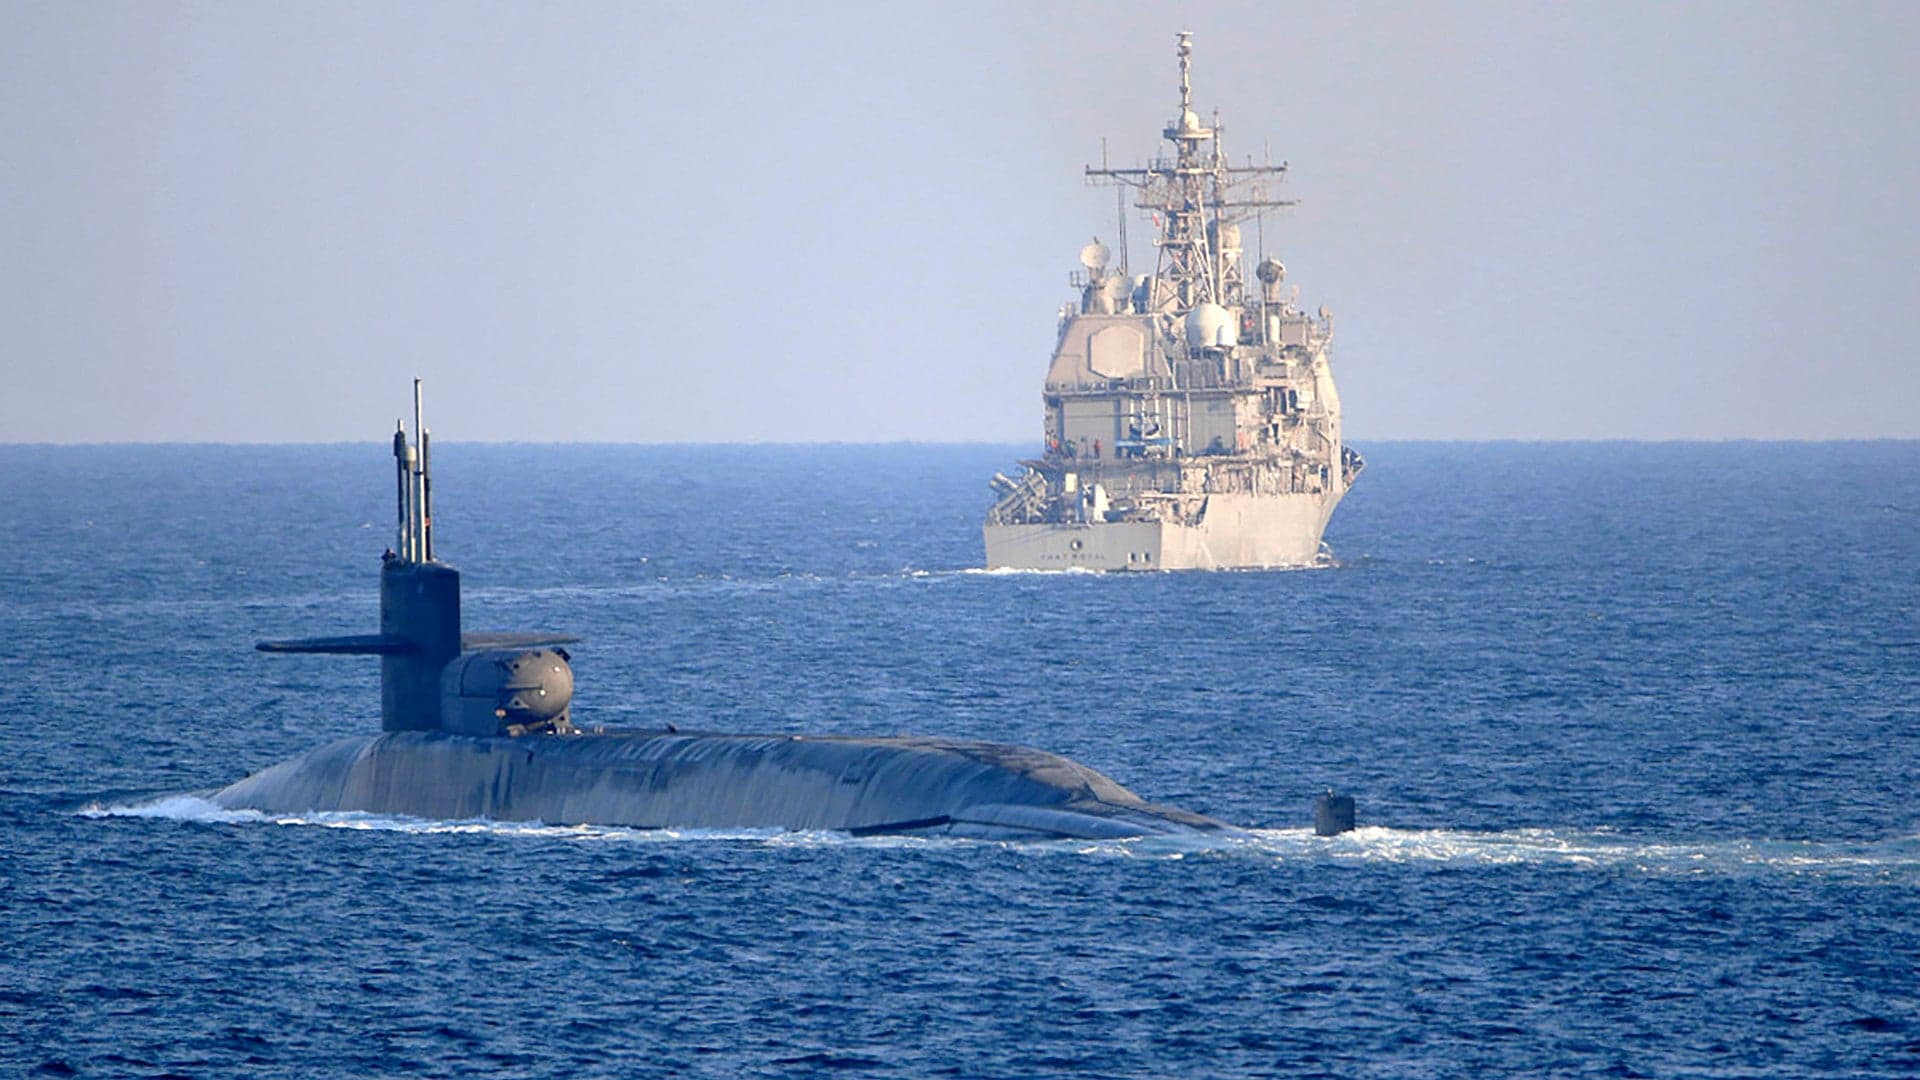 Message To Iran: Navy Sends Guided-Missile Submarine On Rare Trip Into The Persian Gulf (Updated)